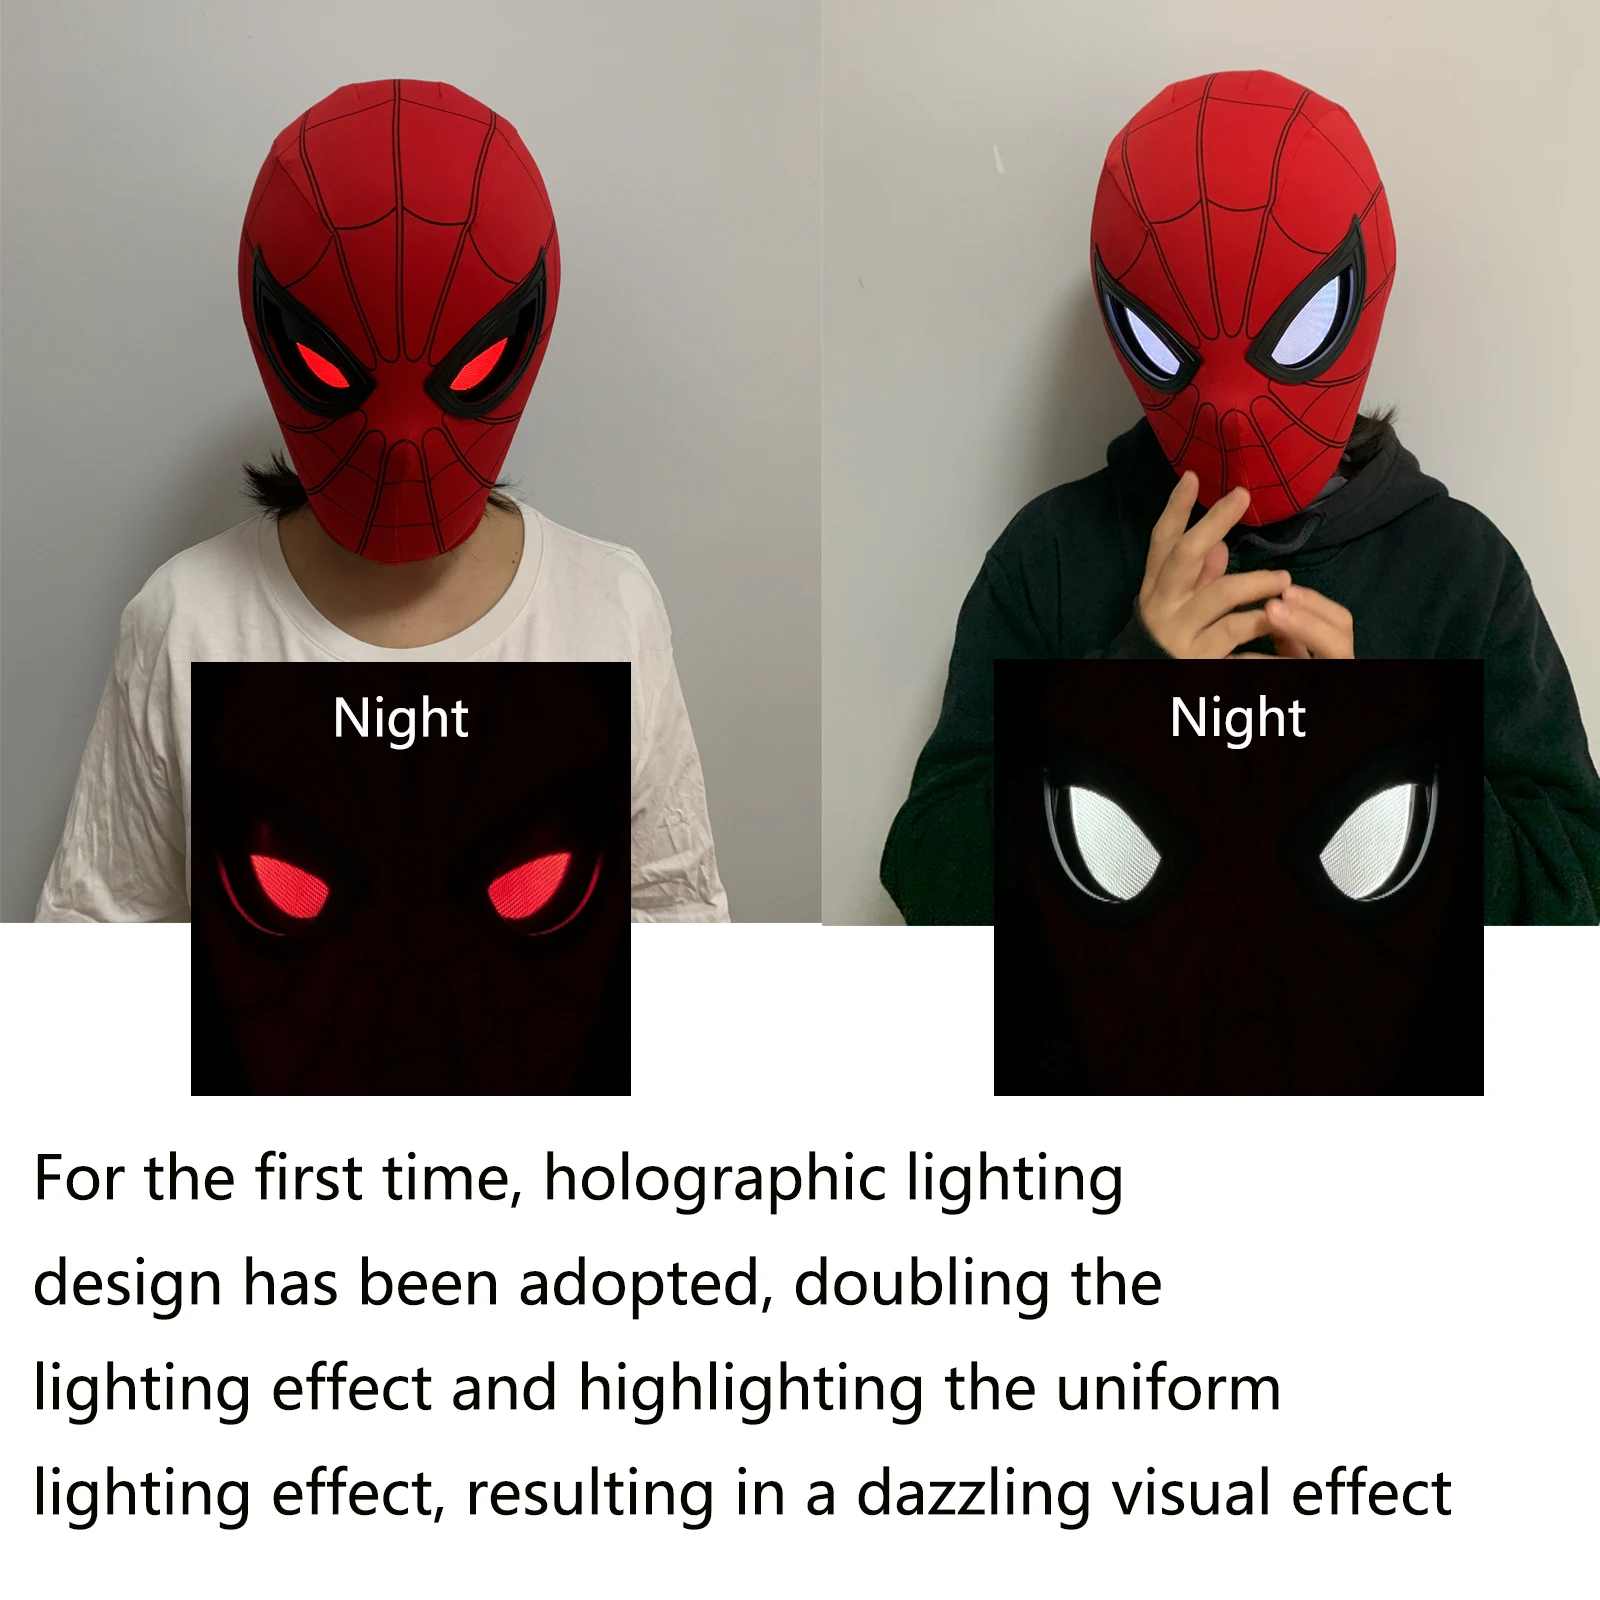 Spiderman Mask, Spider Man Homecoming Upgraded Cosplay Mask, Spiderman Mask  With Blinkable Eyes, Spider-man Wearable Movie Prop Replica 